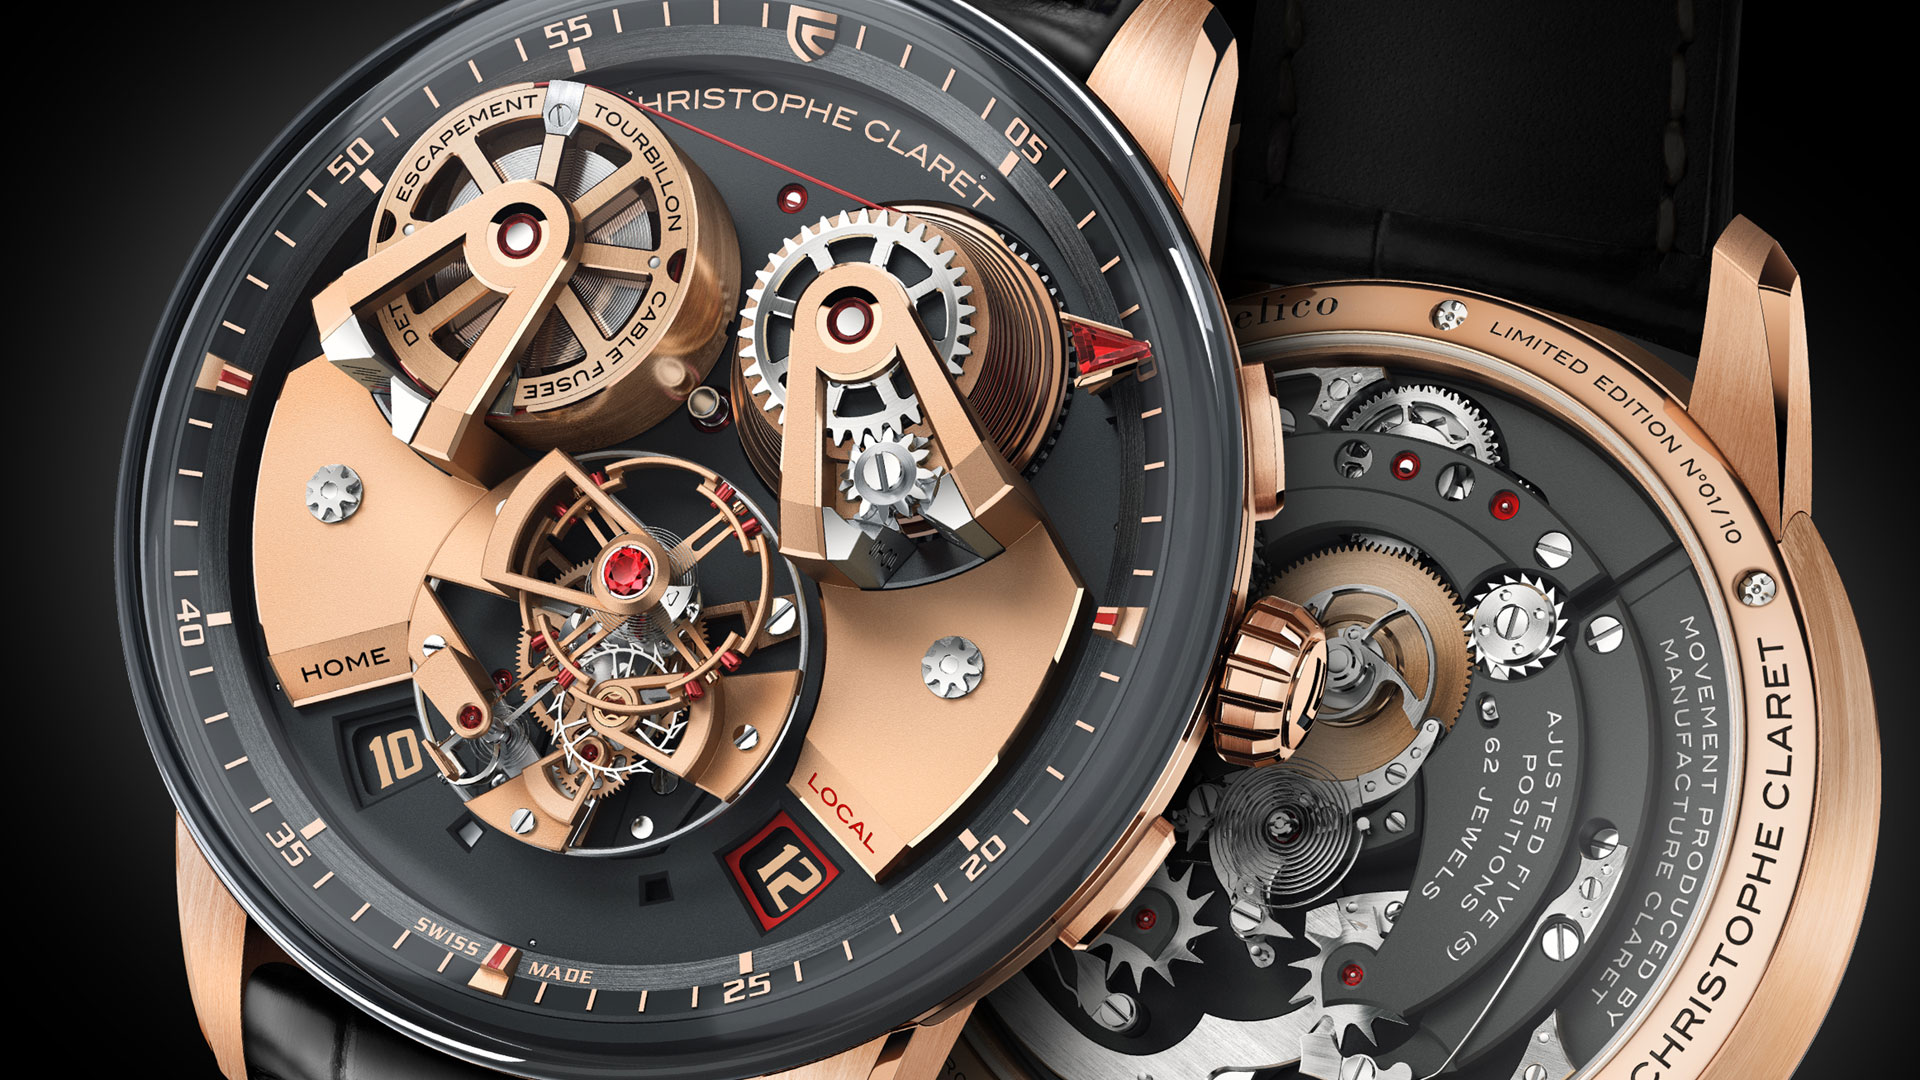 Christophe Claret Angelico Watch